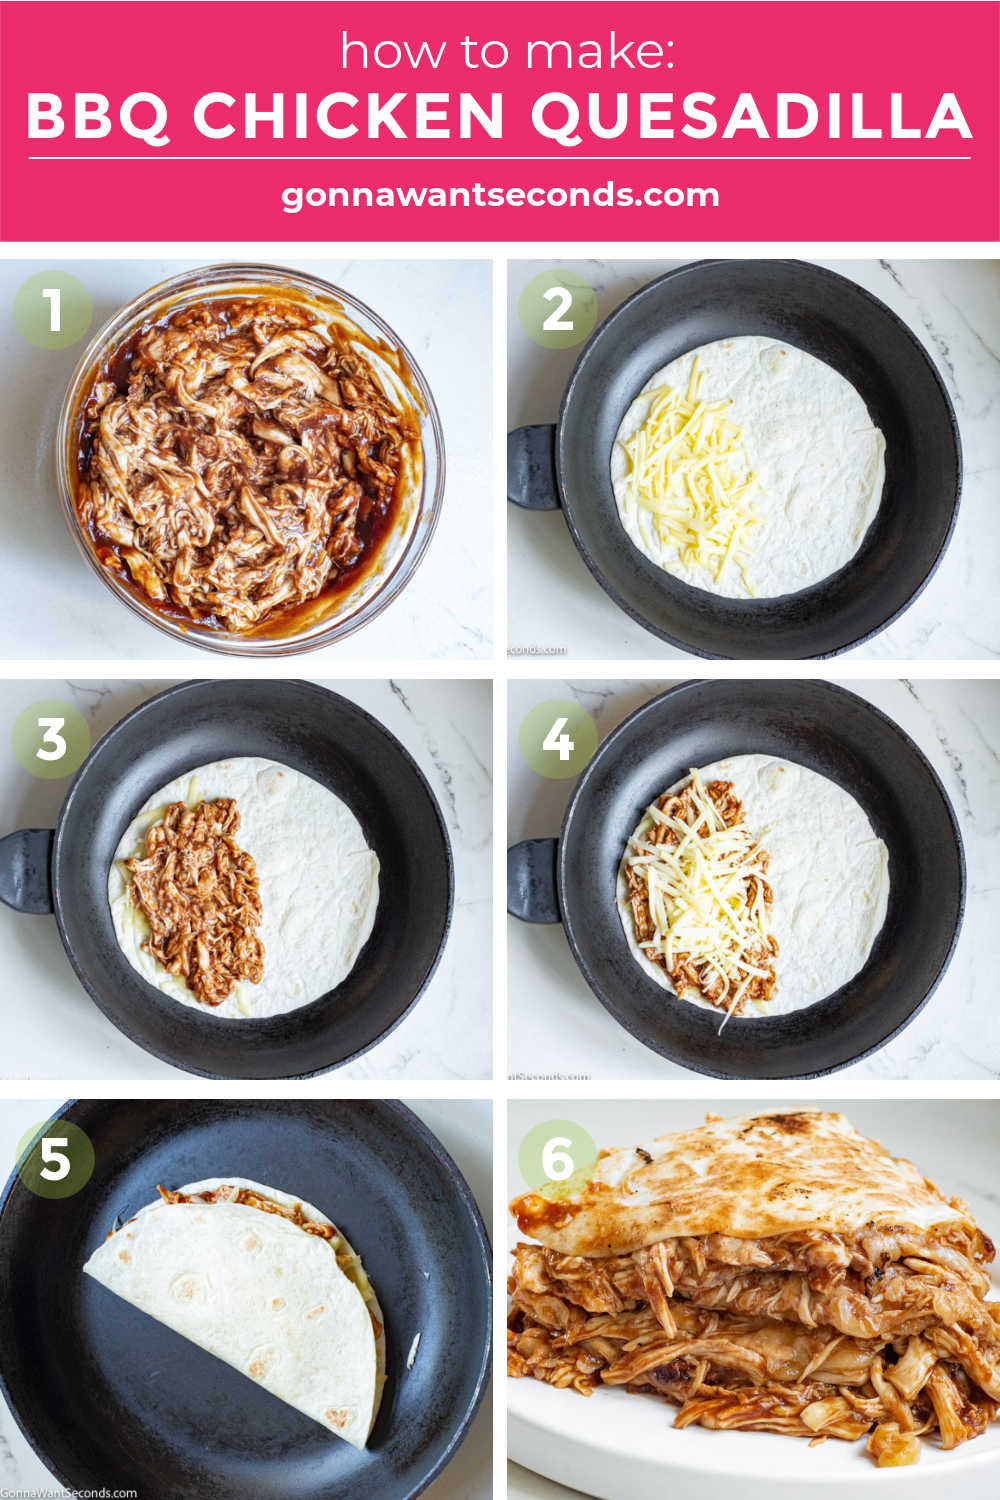 Step by step How to make BBQ Chicken Quesadilla